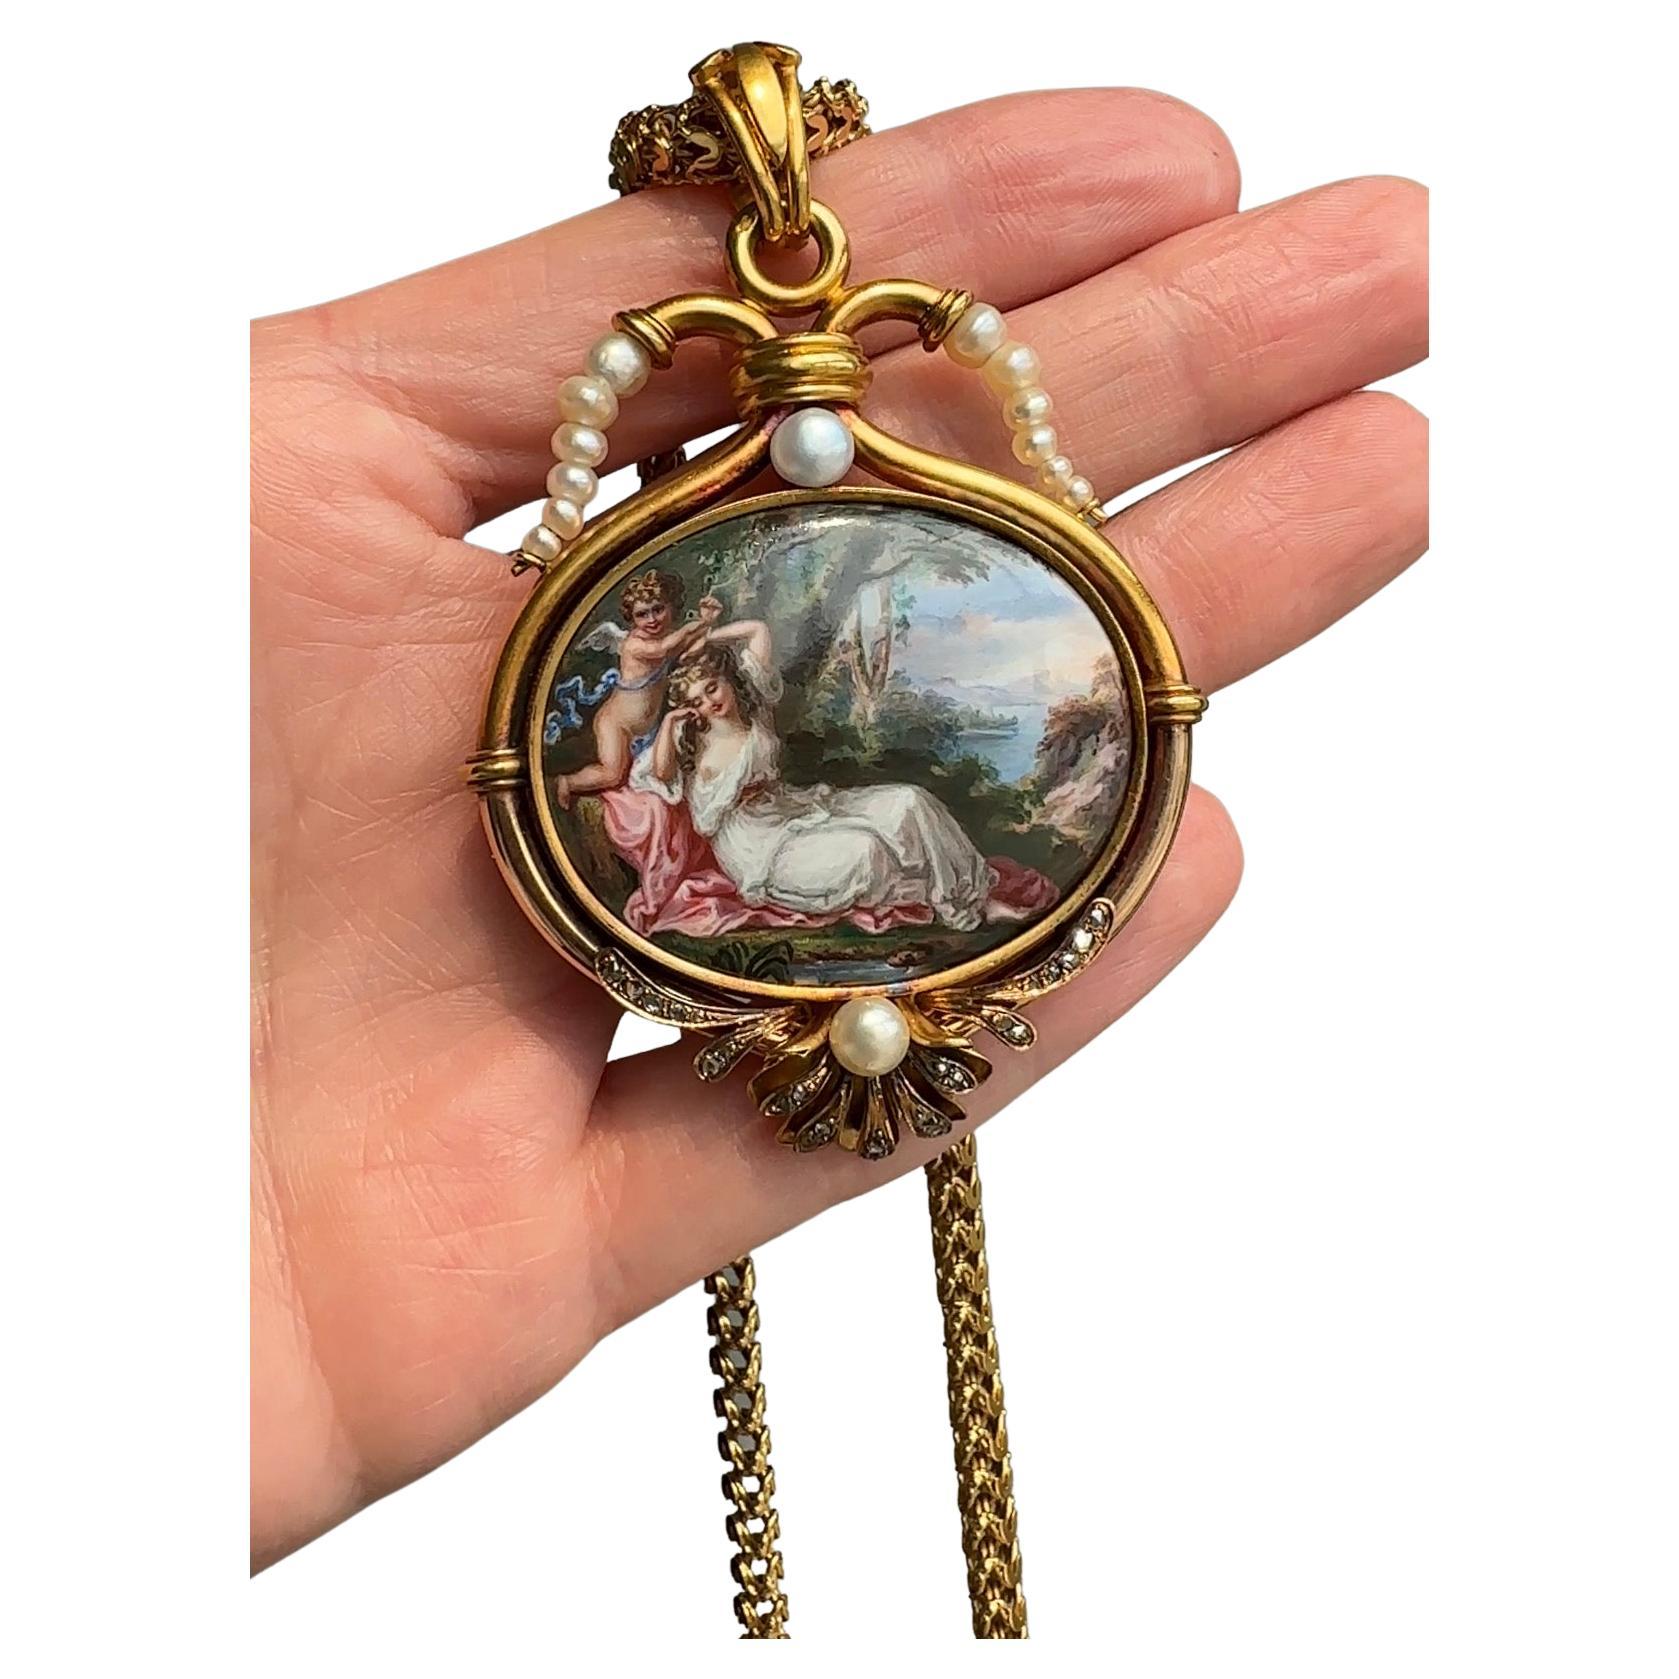 Late 19th C Enamel Miniature Pendant Necklace of Cupid and Psyche with Locket